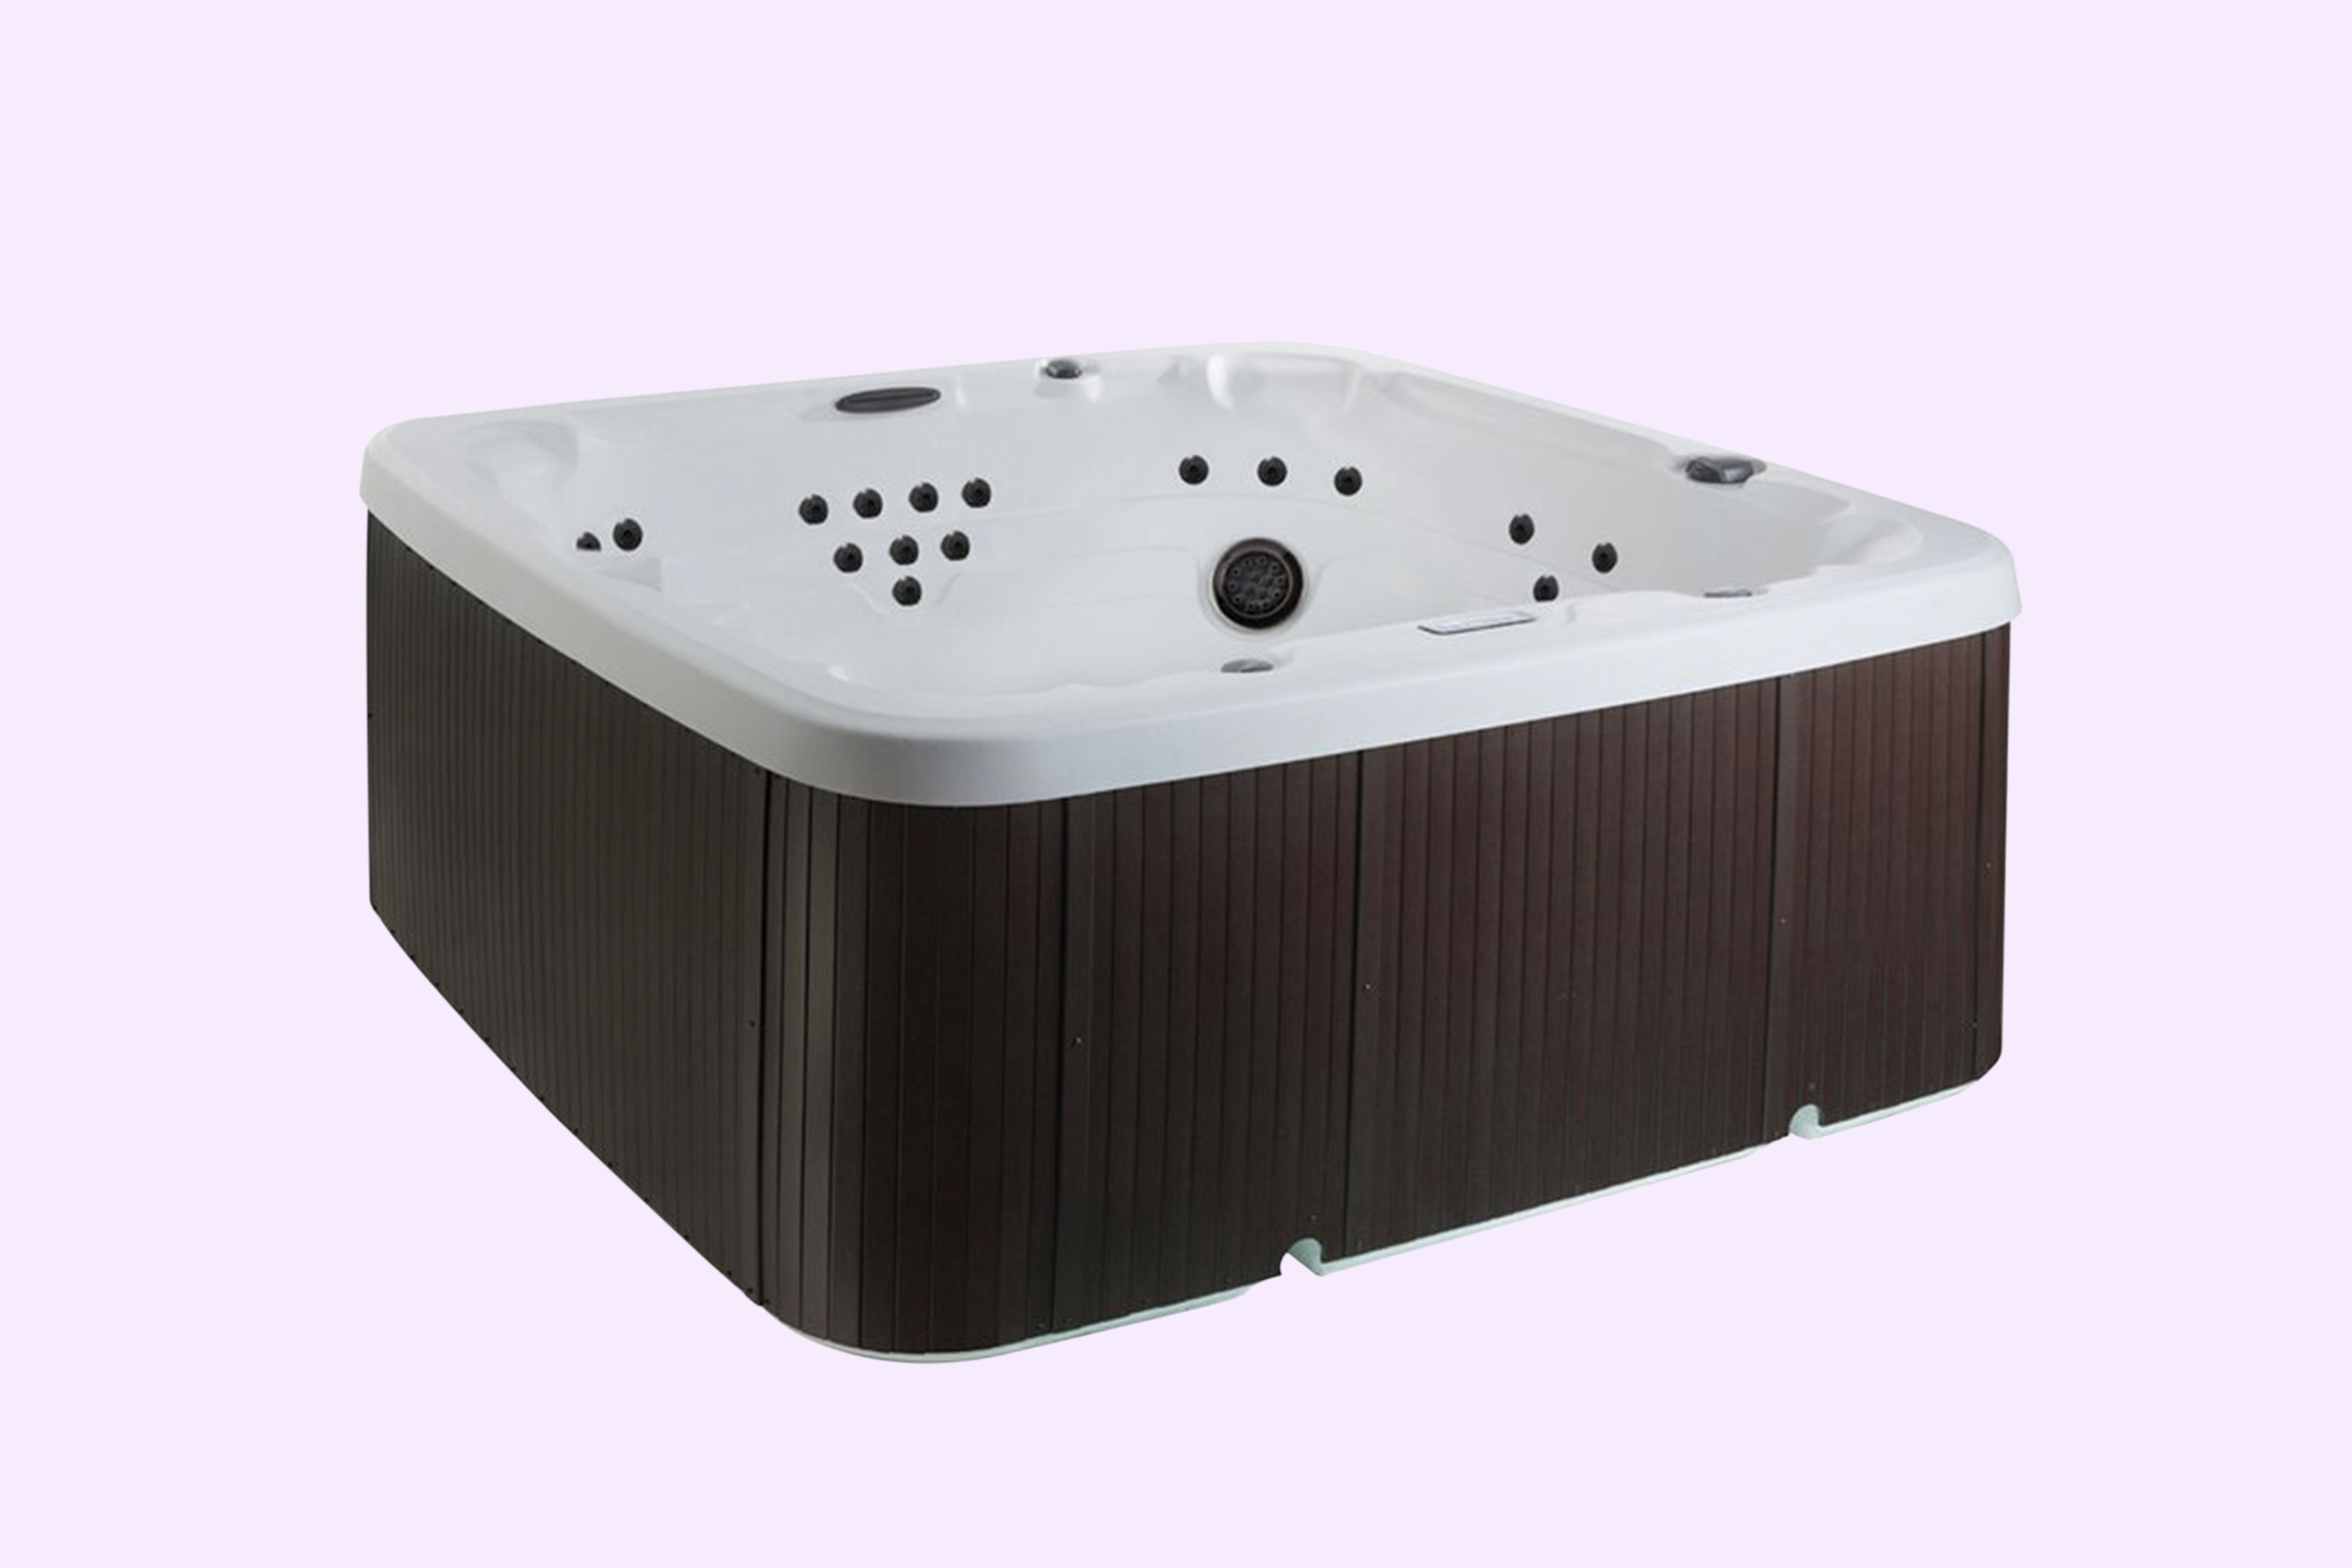 Best inflatable hot tub